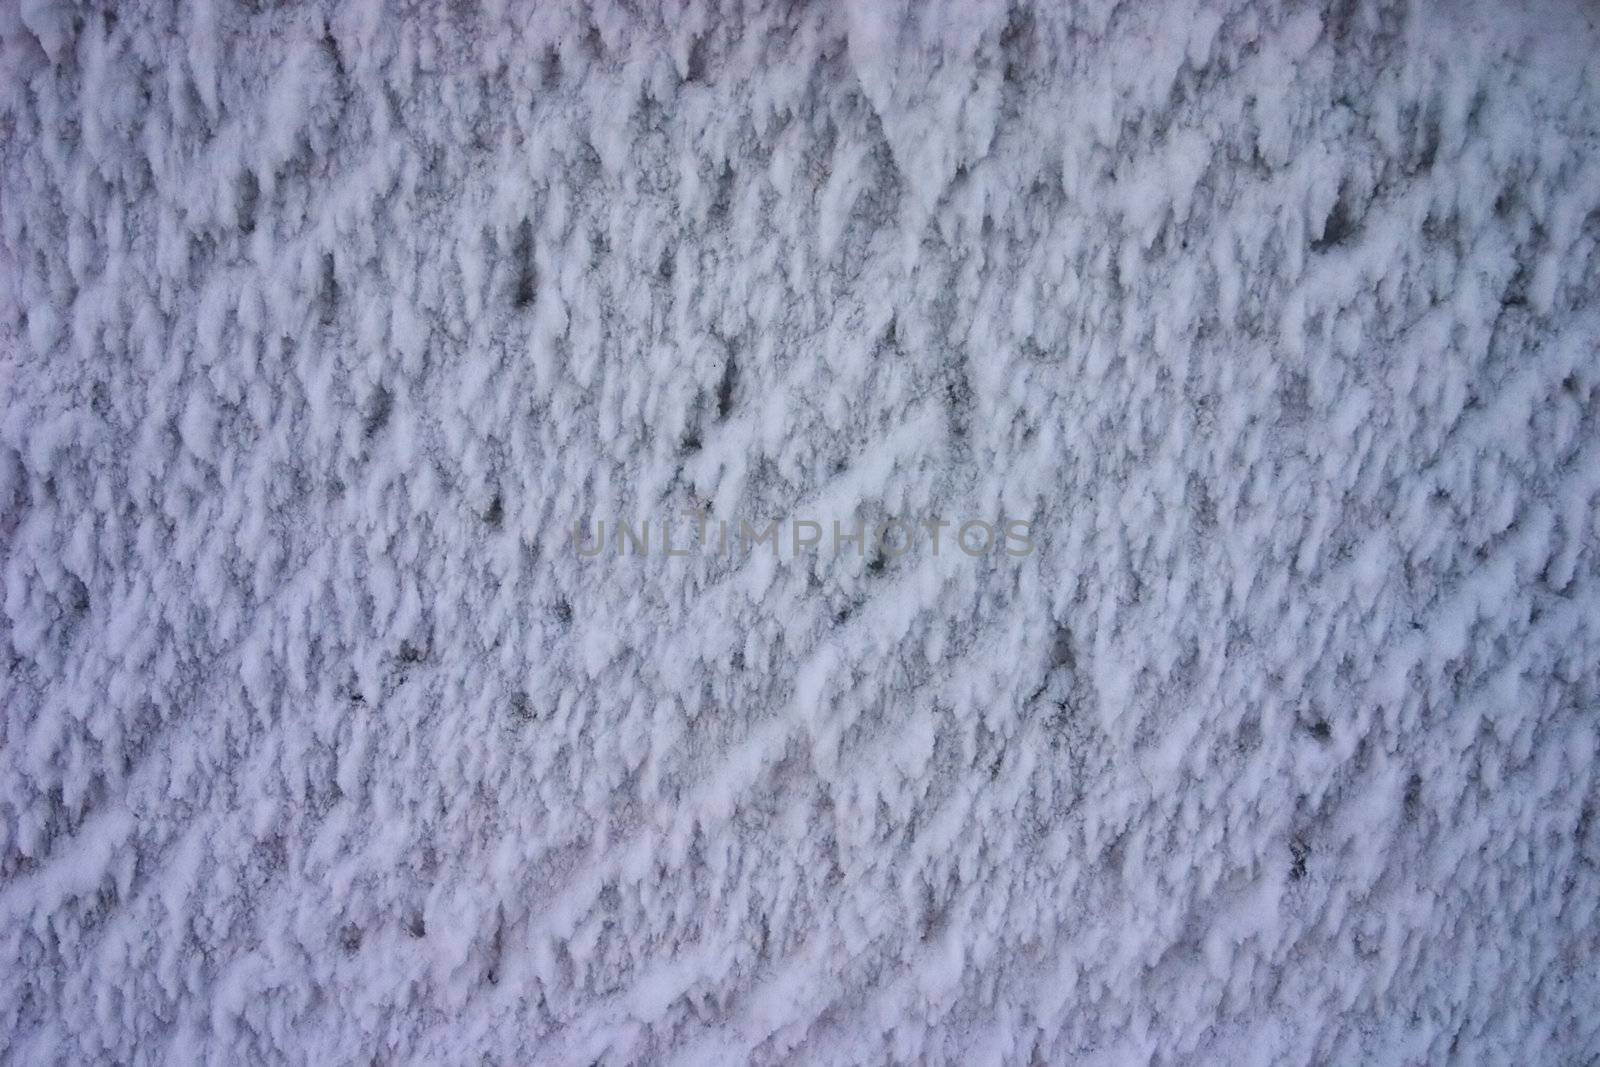 texture image of ice-covered surface with shallow details